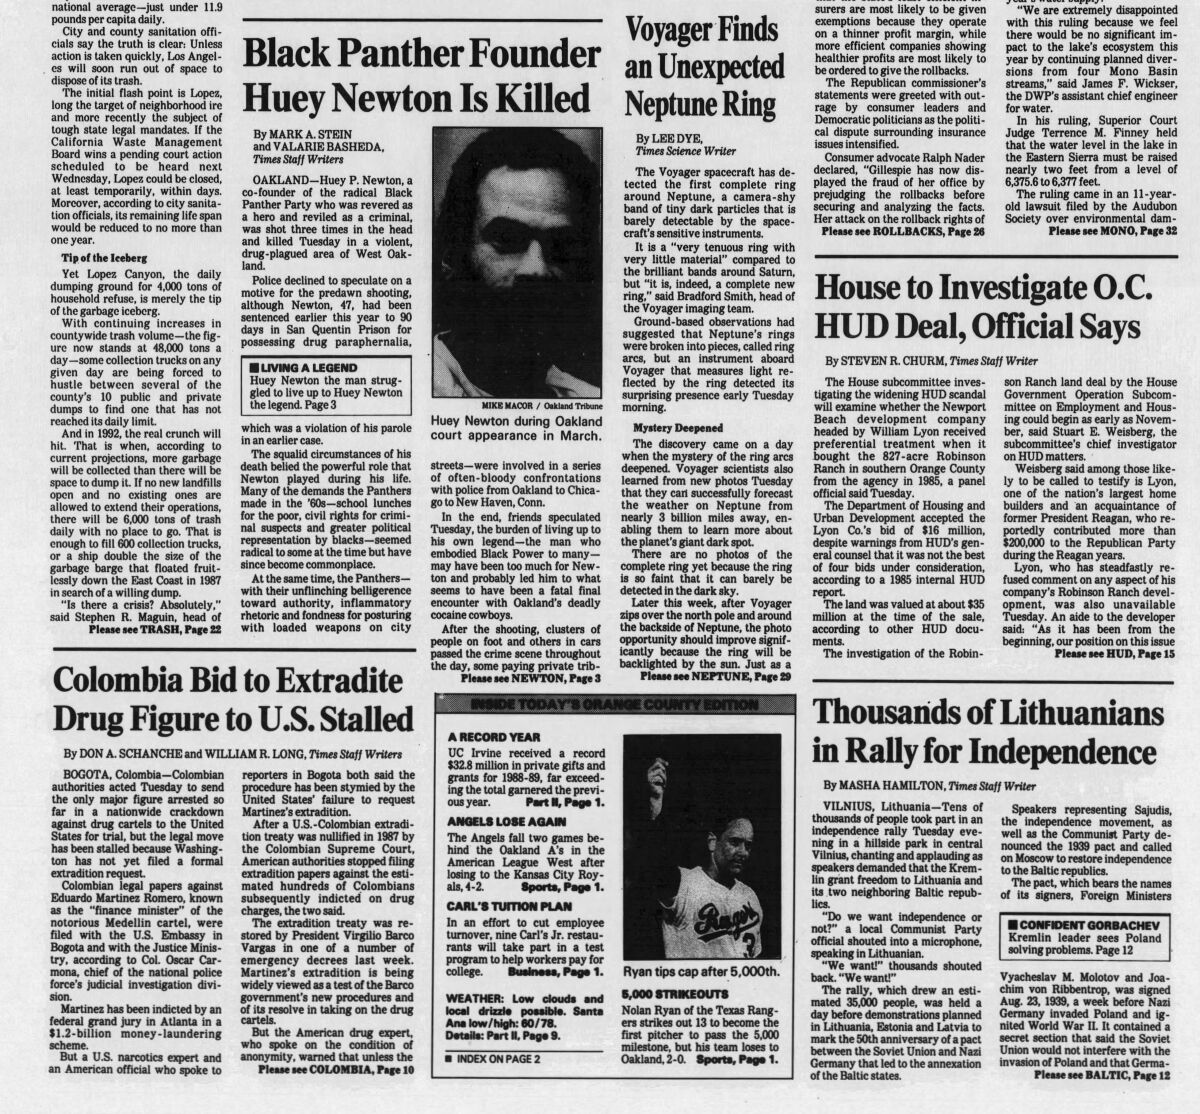 Los Angeles Times newspaper clipping that highlights the killing of Huey P. Newton